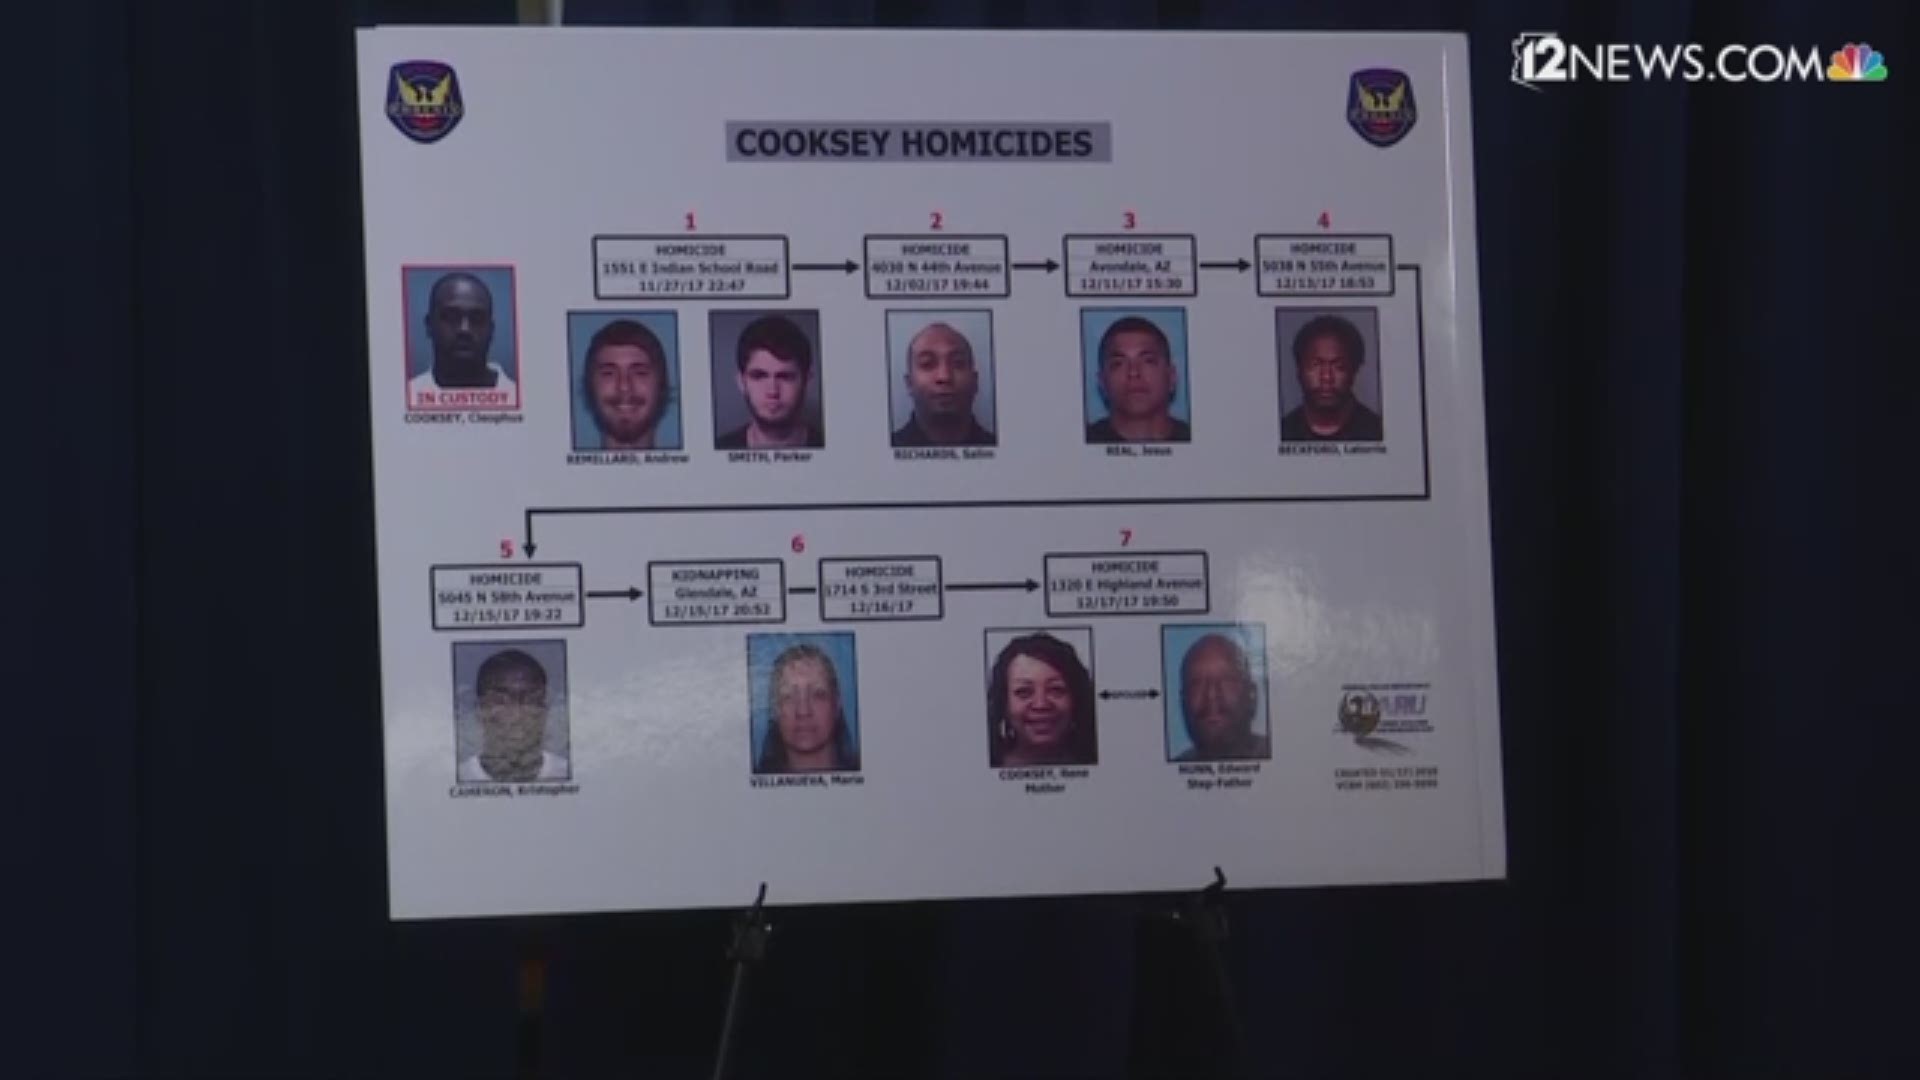 The murders have been linked to one man, Cleophus Cooksey Jr., police say.